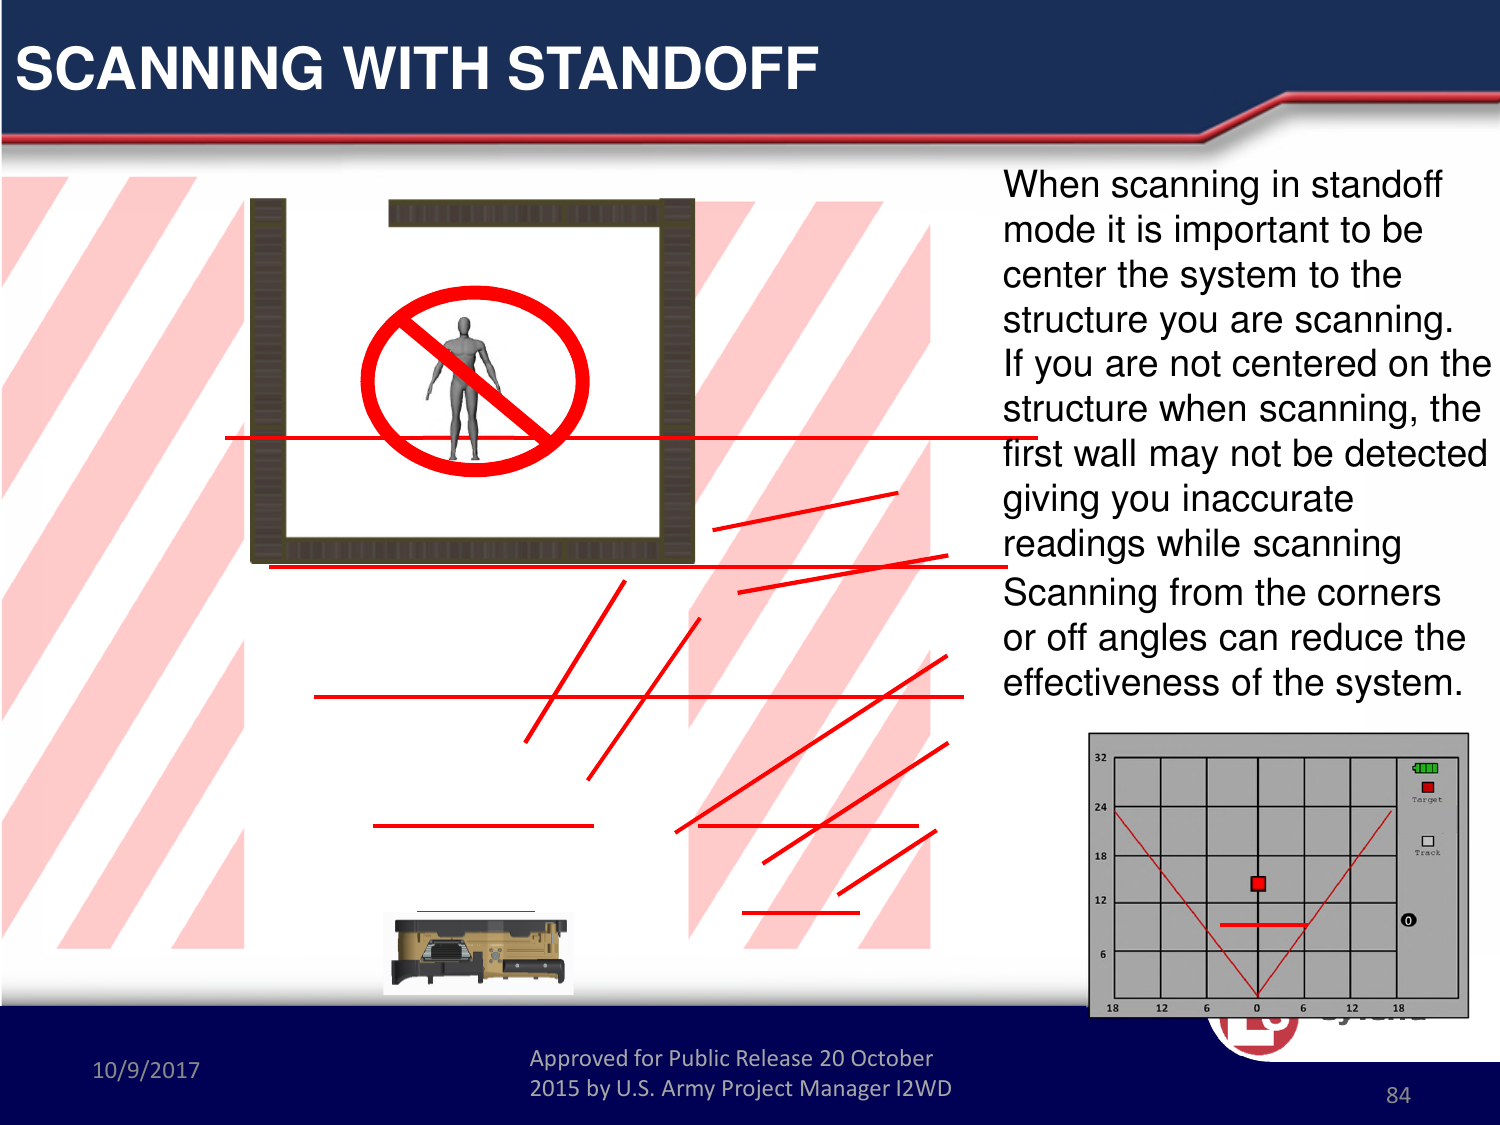 Approved for Public Release 20 October 2015 by U.S. Army Project Manager I2WD10/9/2017 Approved for Public Release 20 October 2015 by U.S. Army Project Manager I2WD 84CyTerraScanning from the corners or off angles can reduce the effectiveness of the system.SCANNING WITH STANDOFF When scanning in standoff mode it is important to be center the system to the structure you are scanning.If you are not centered on the structure when scanning, the first wall may not be detected giving you inaccurate readings while scanning